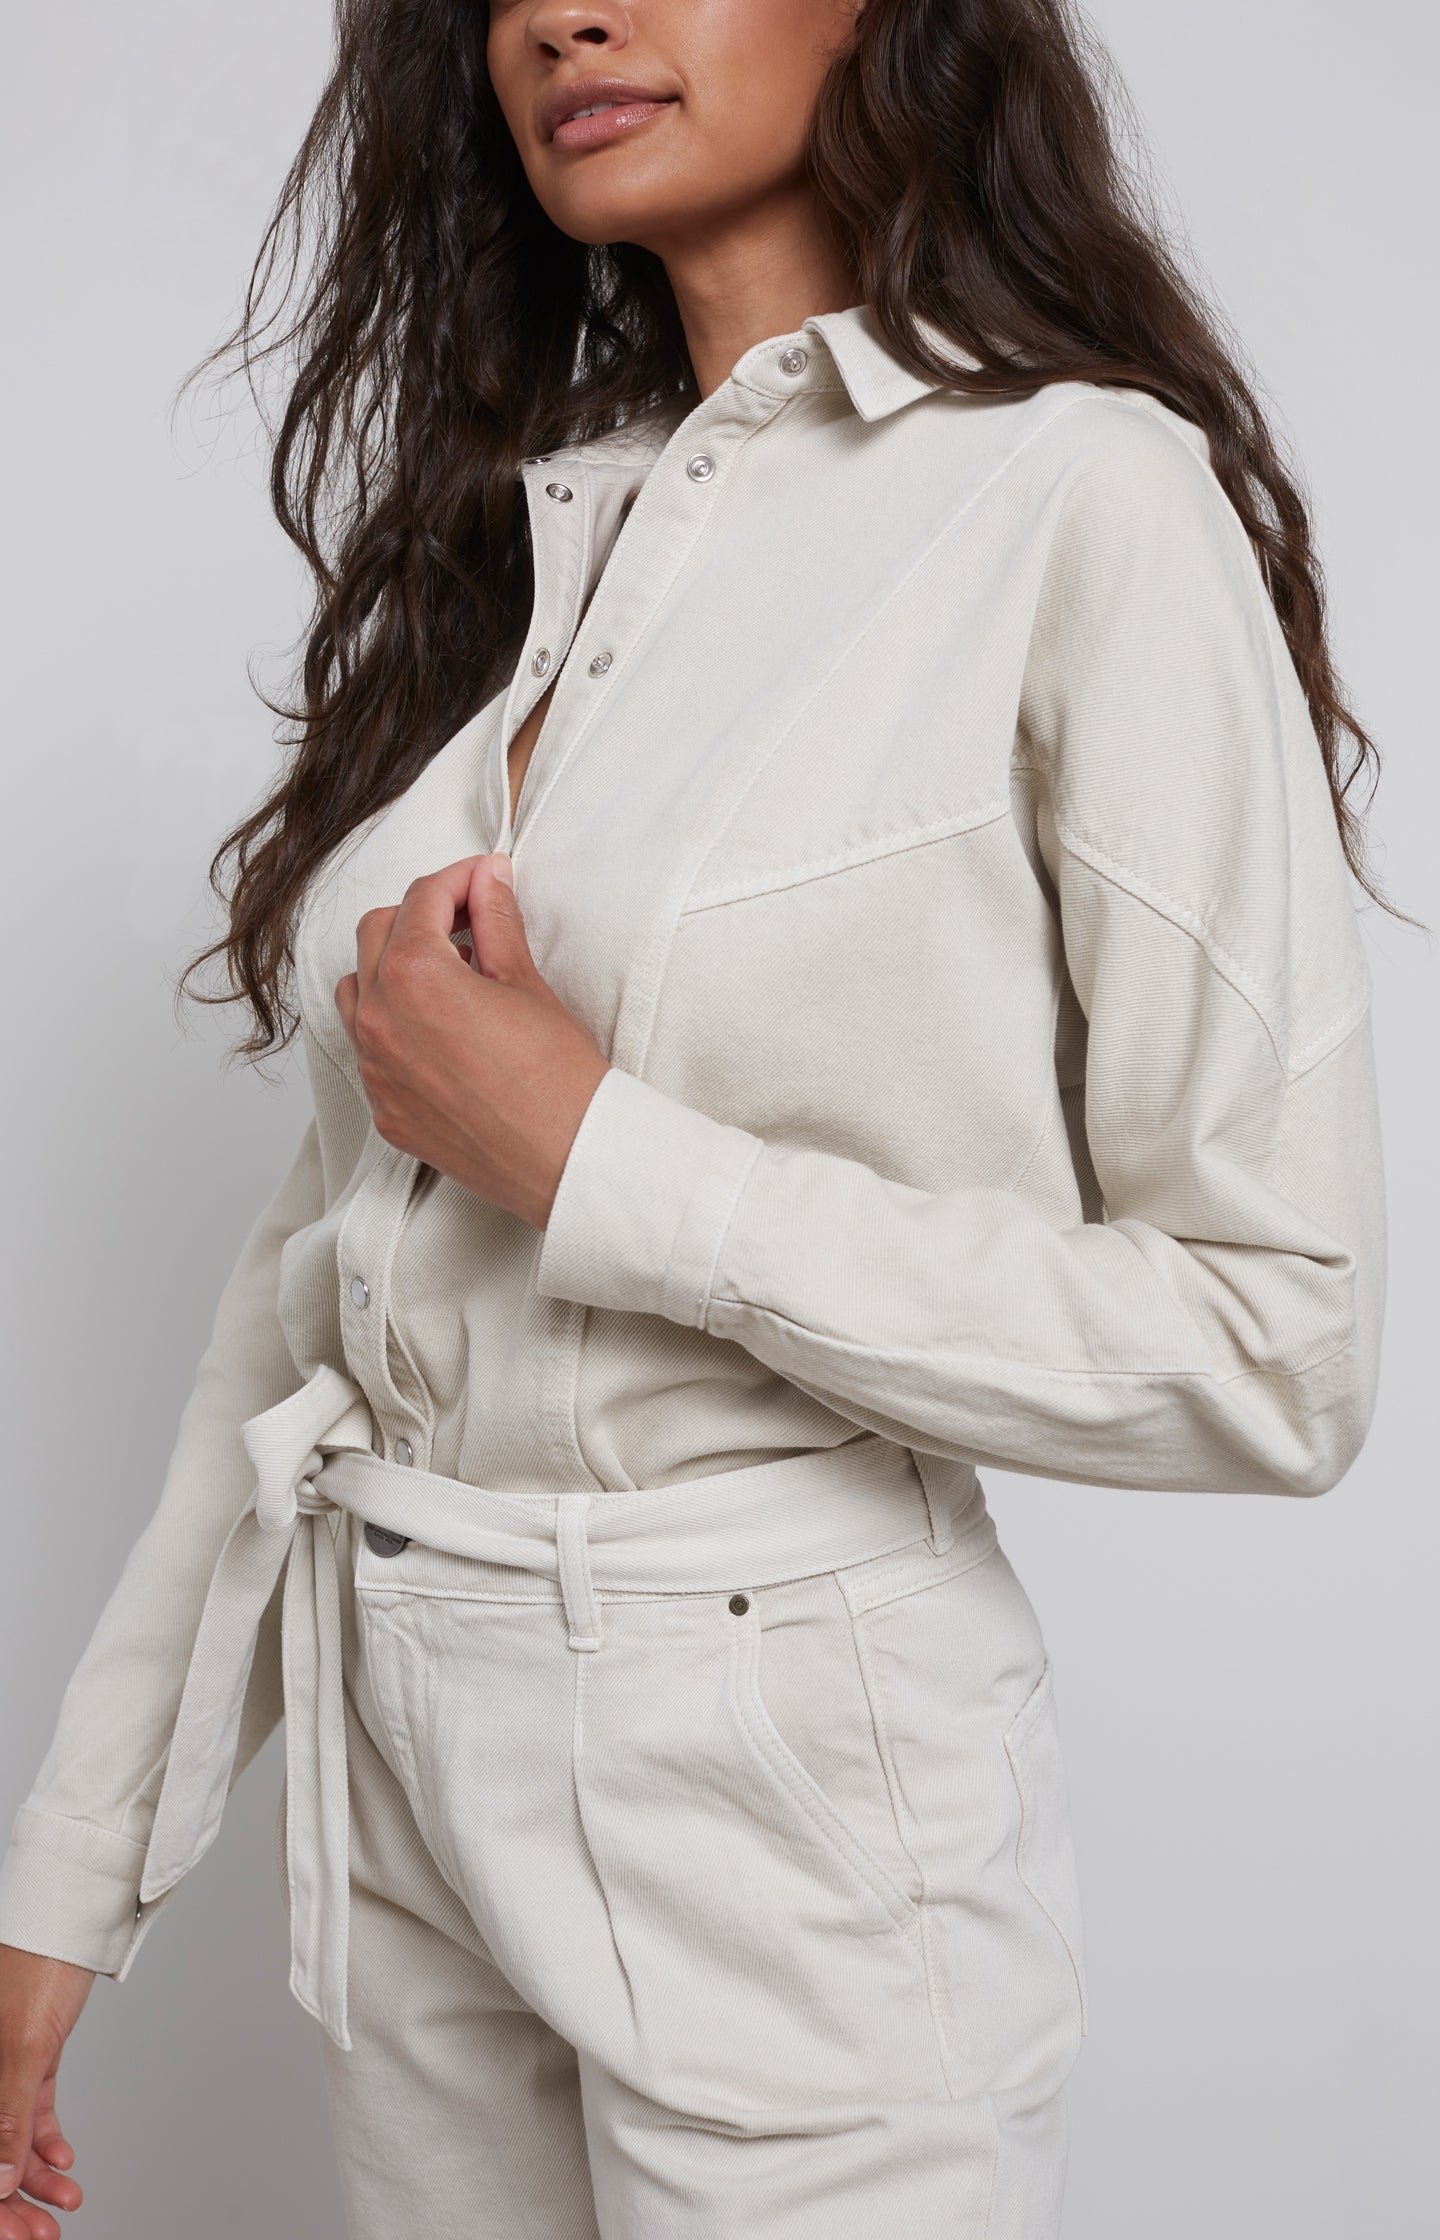 Blouse with long sleeves, press studs and seam details